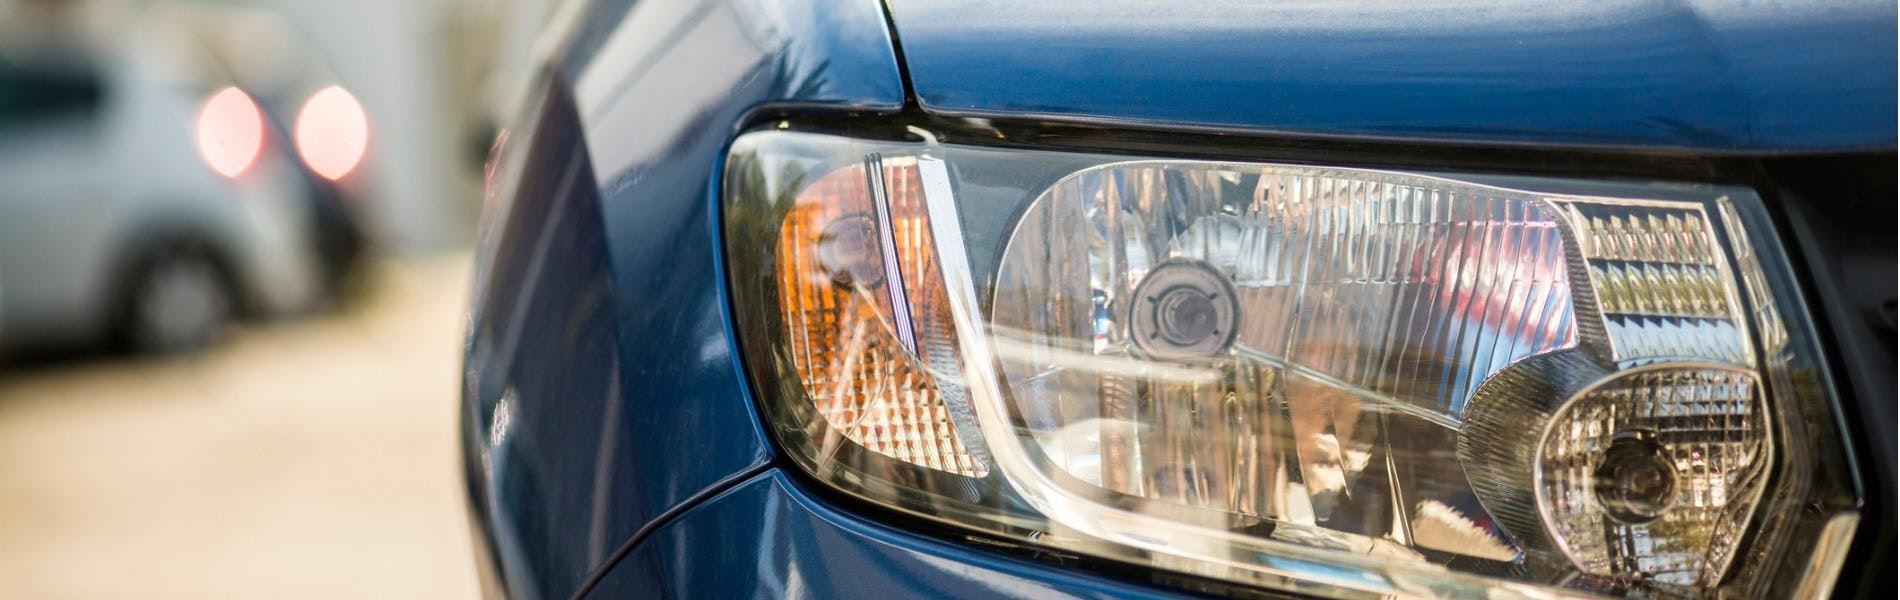 HID headlight in daytime of a blue vehicle